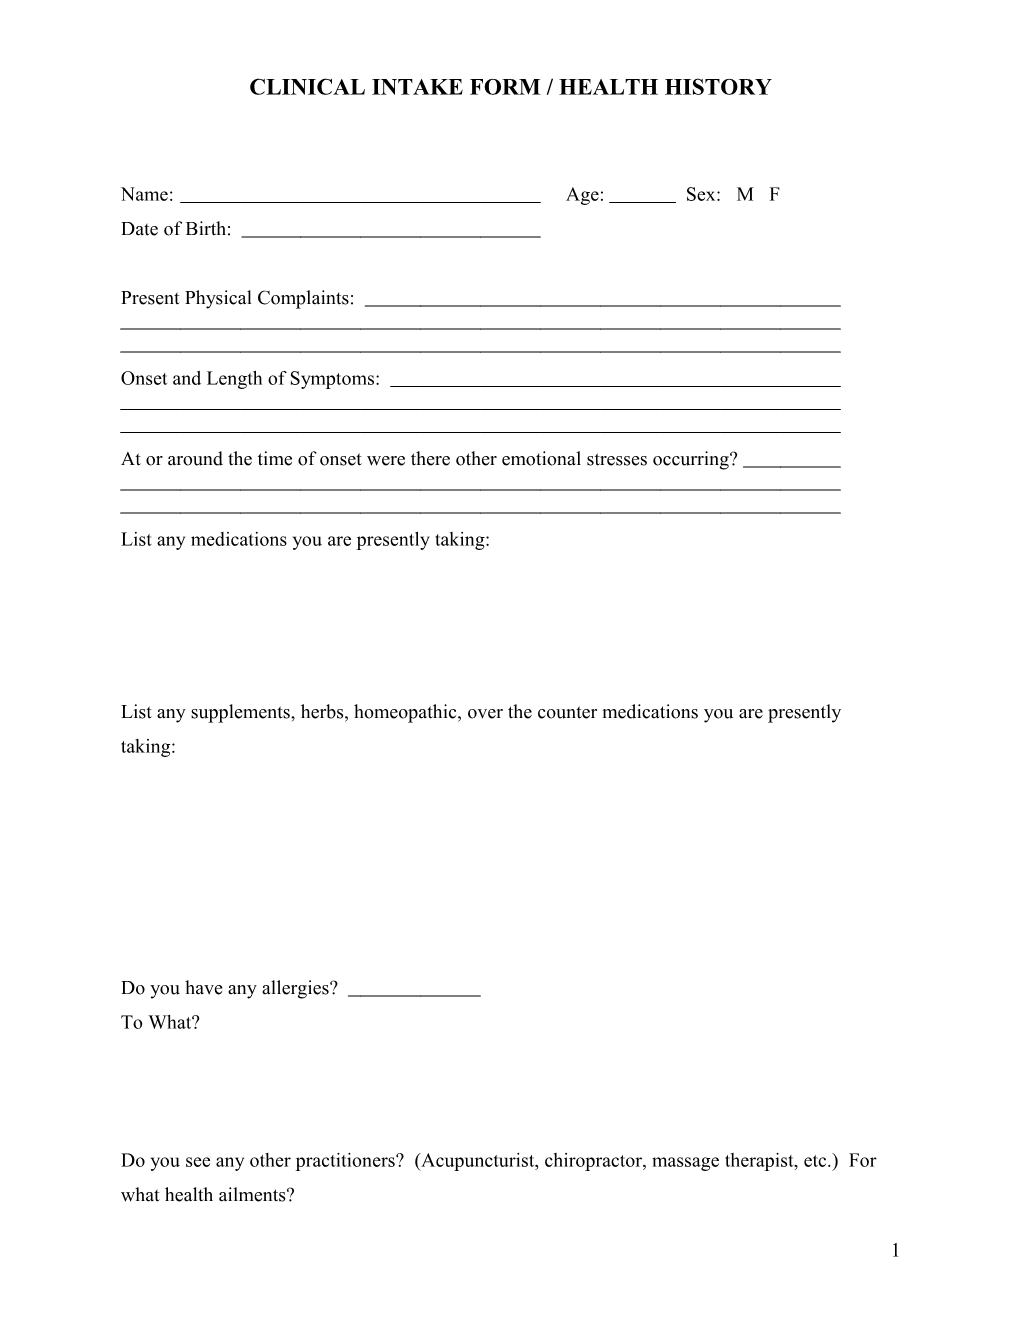 Clinical Intake Form / Health History